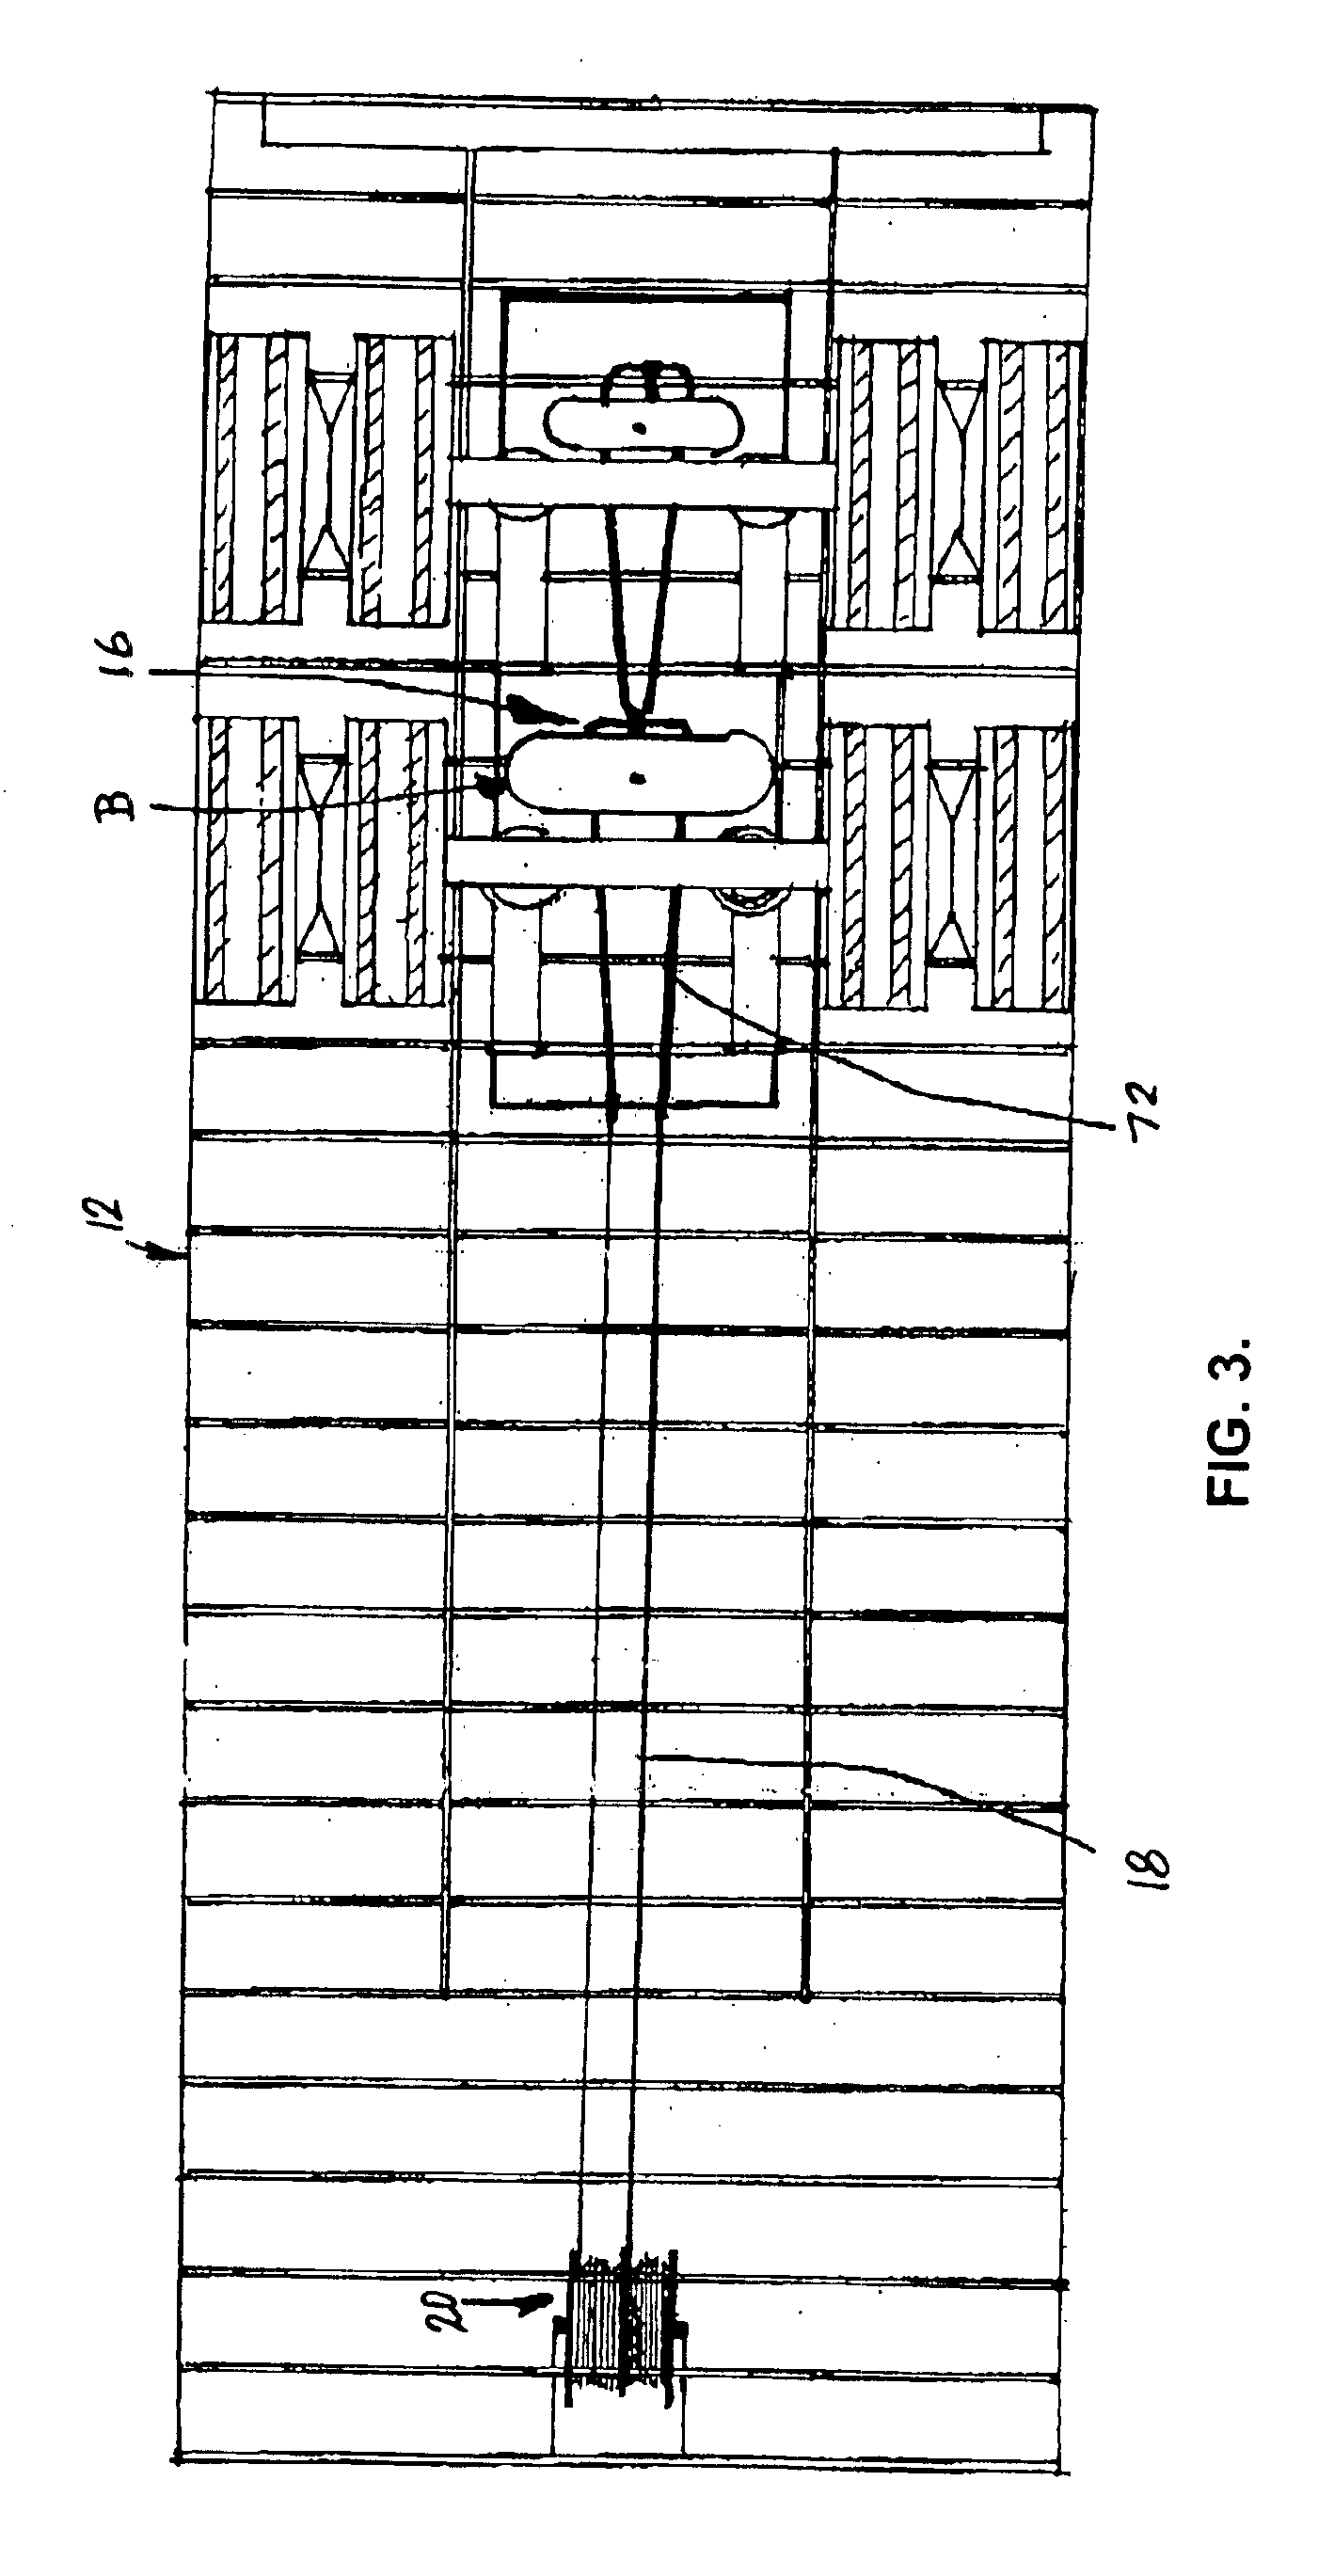 Fluid hose-supporting system for truck